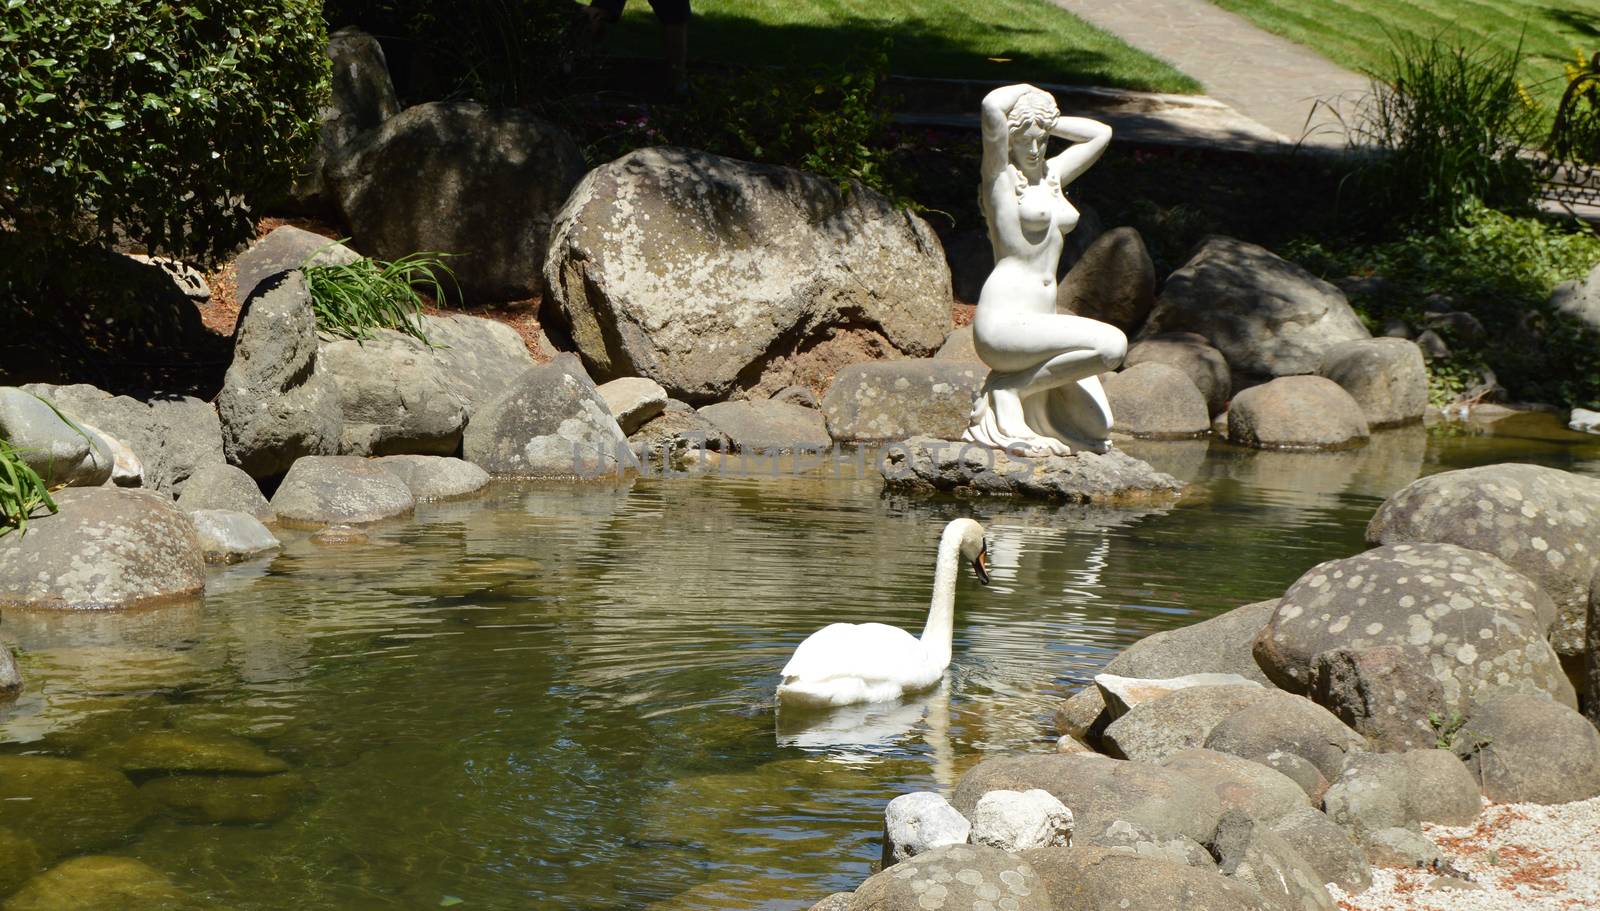 ART sculpture of Aphrodite bathing by the POND, NEXT to SWIMS a SWAN, in Aivazovsky Park, Crimea, Partenit, Russia 3 Jun 2018 by claire_lucia